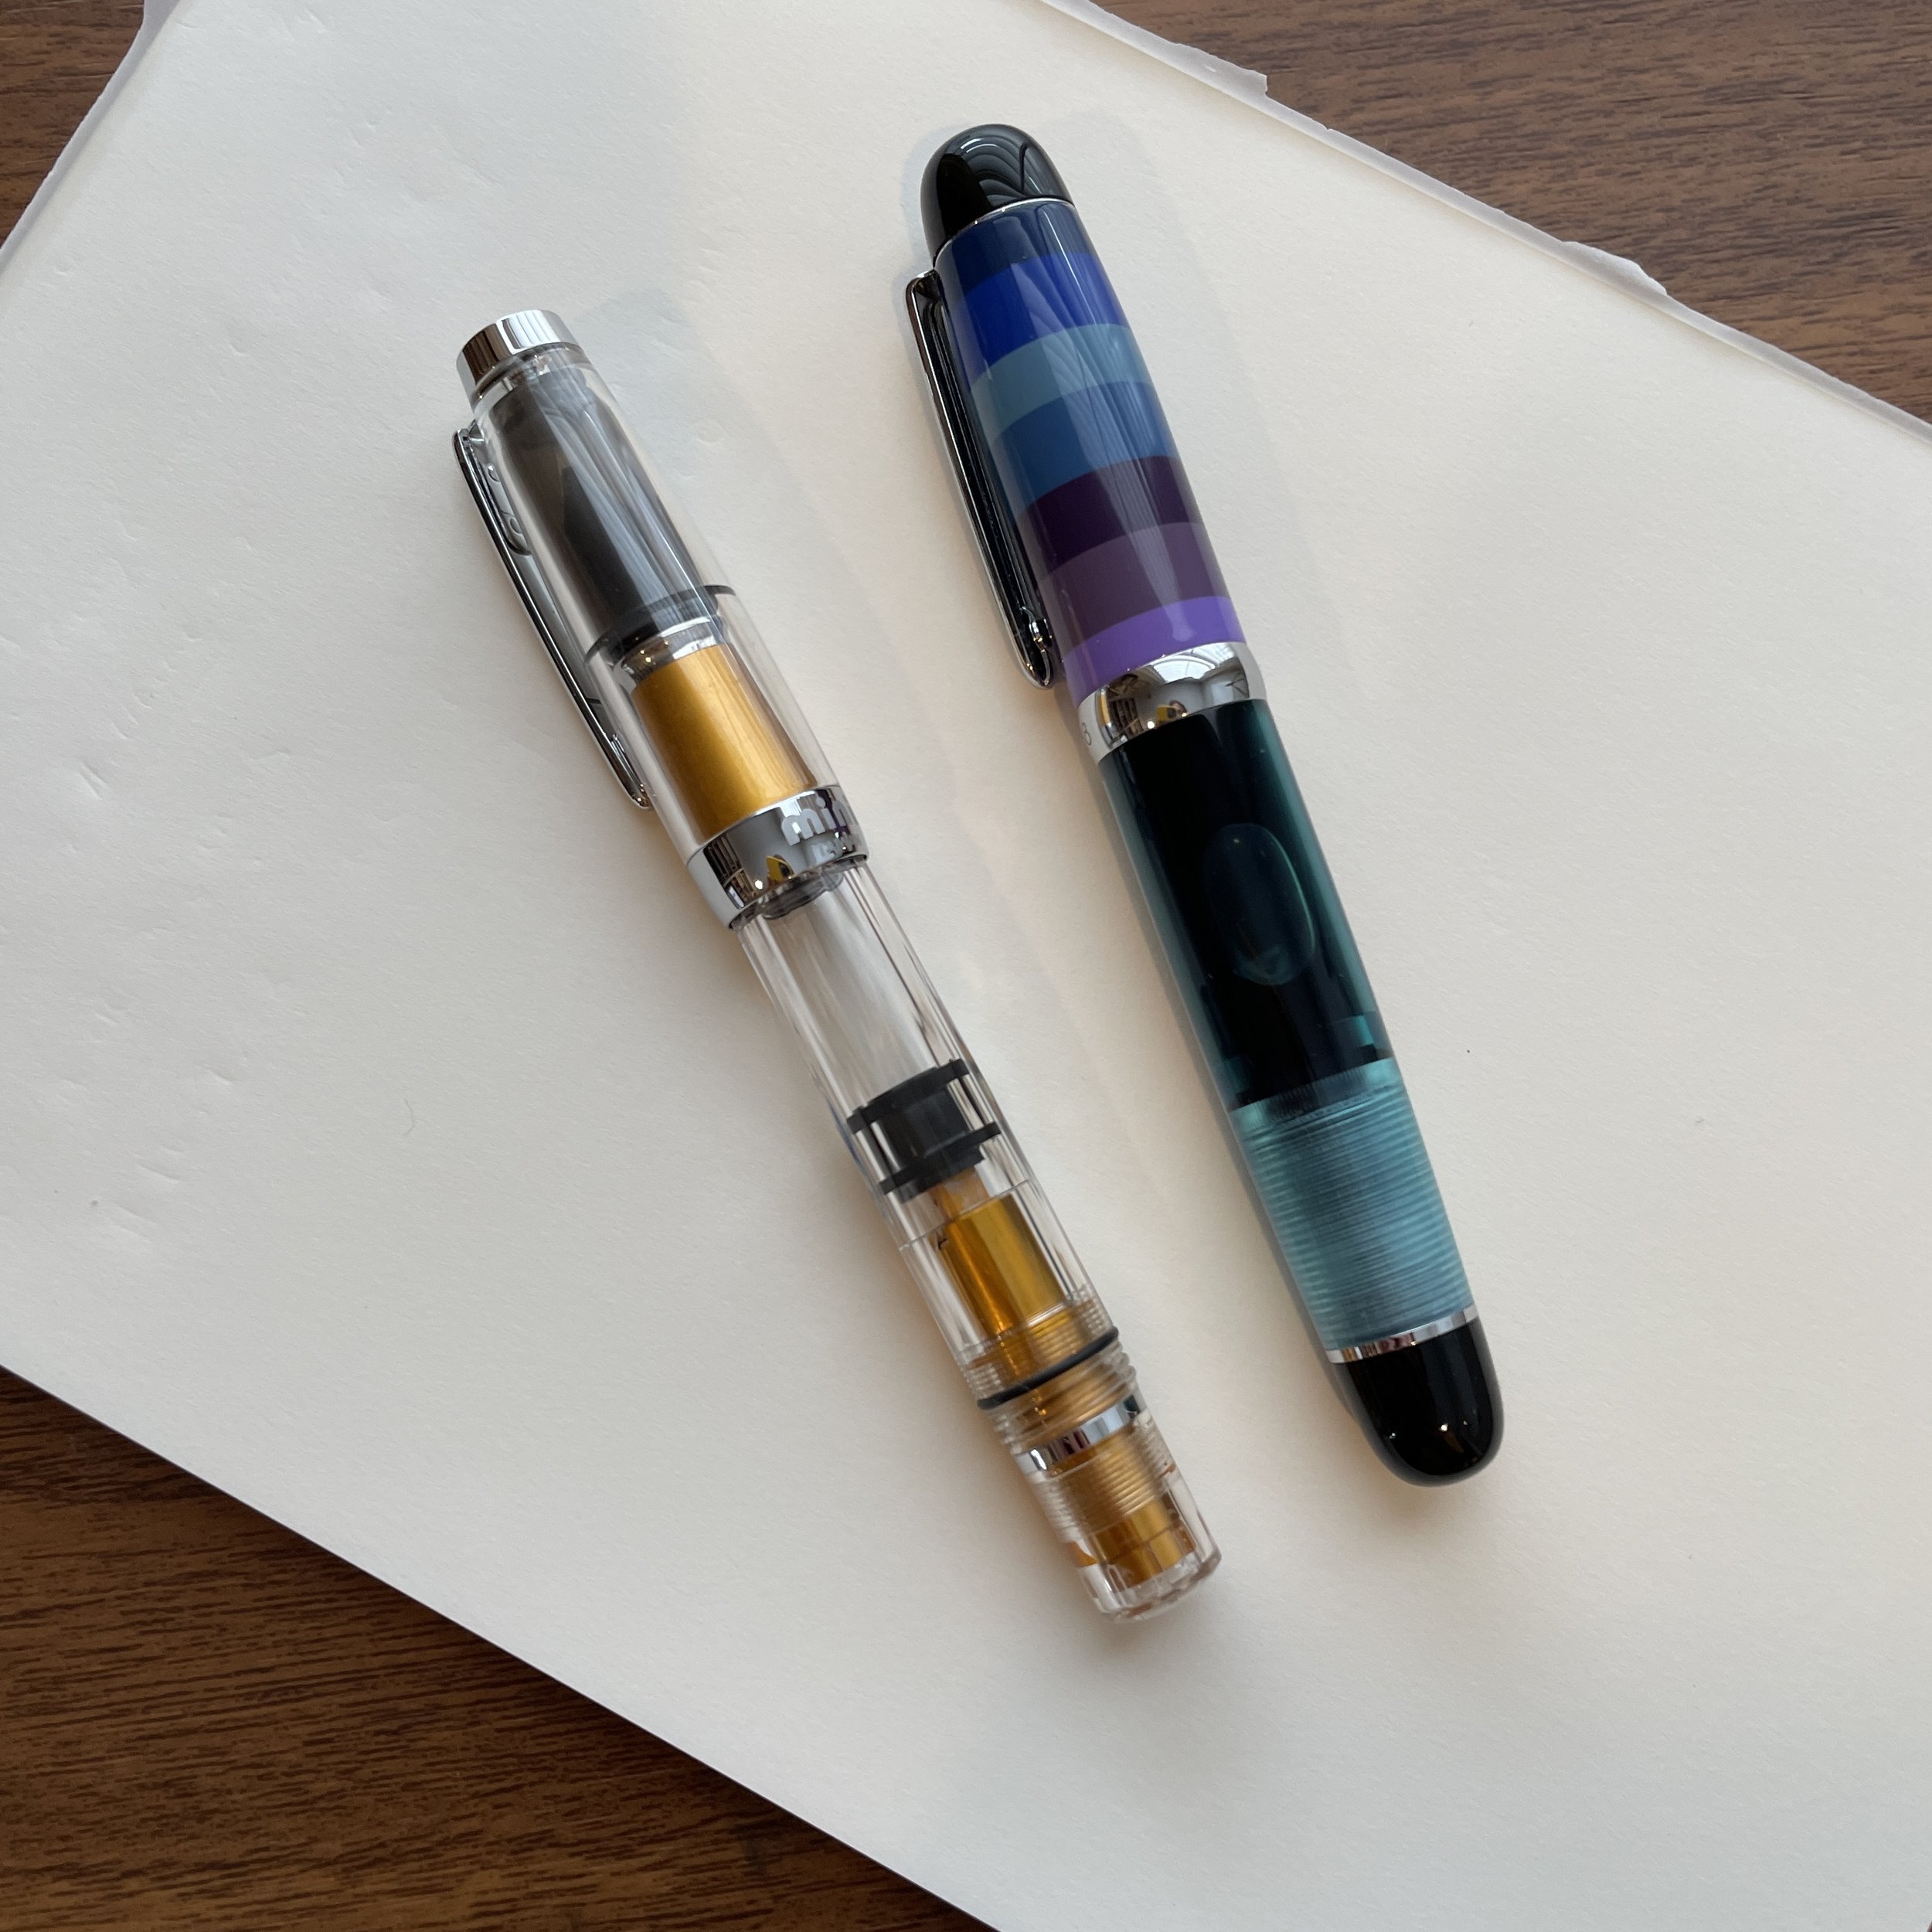 Top 5: Reasons to Use a Fountain Pen - Blog